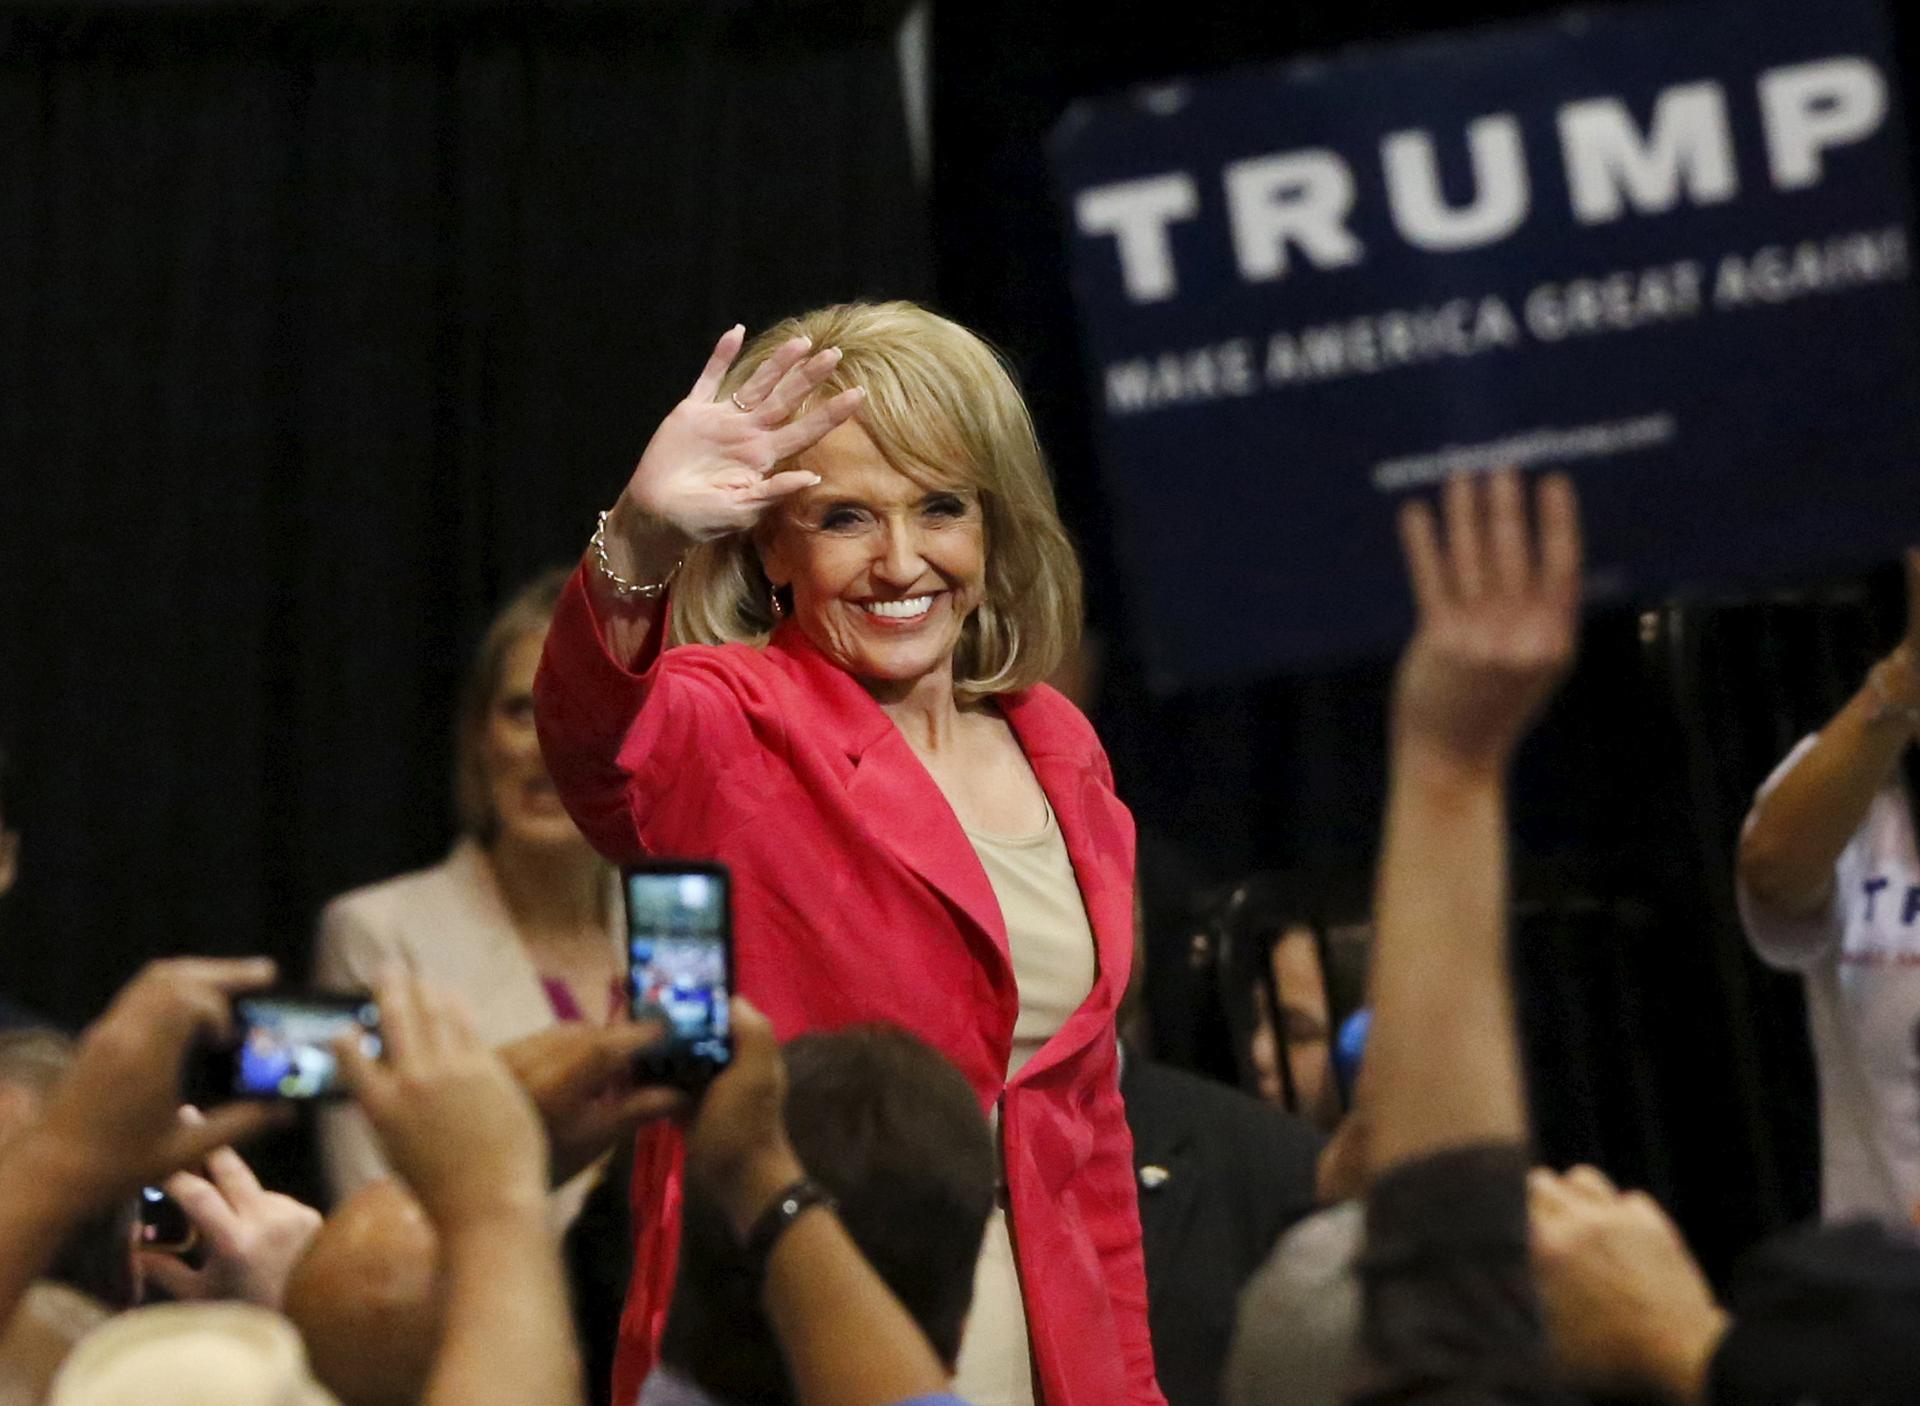 Arizona Governor Jan Brewer during a campaign event for Donald Trump in Tucson, Arizona on March 19.